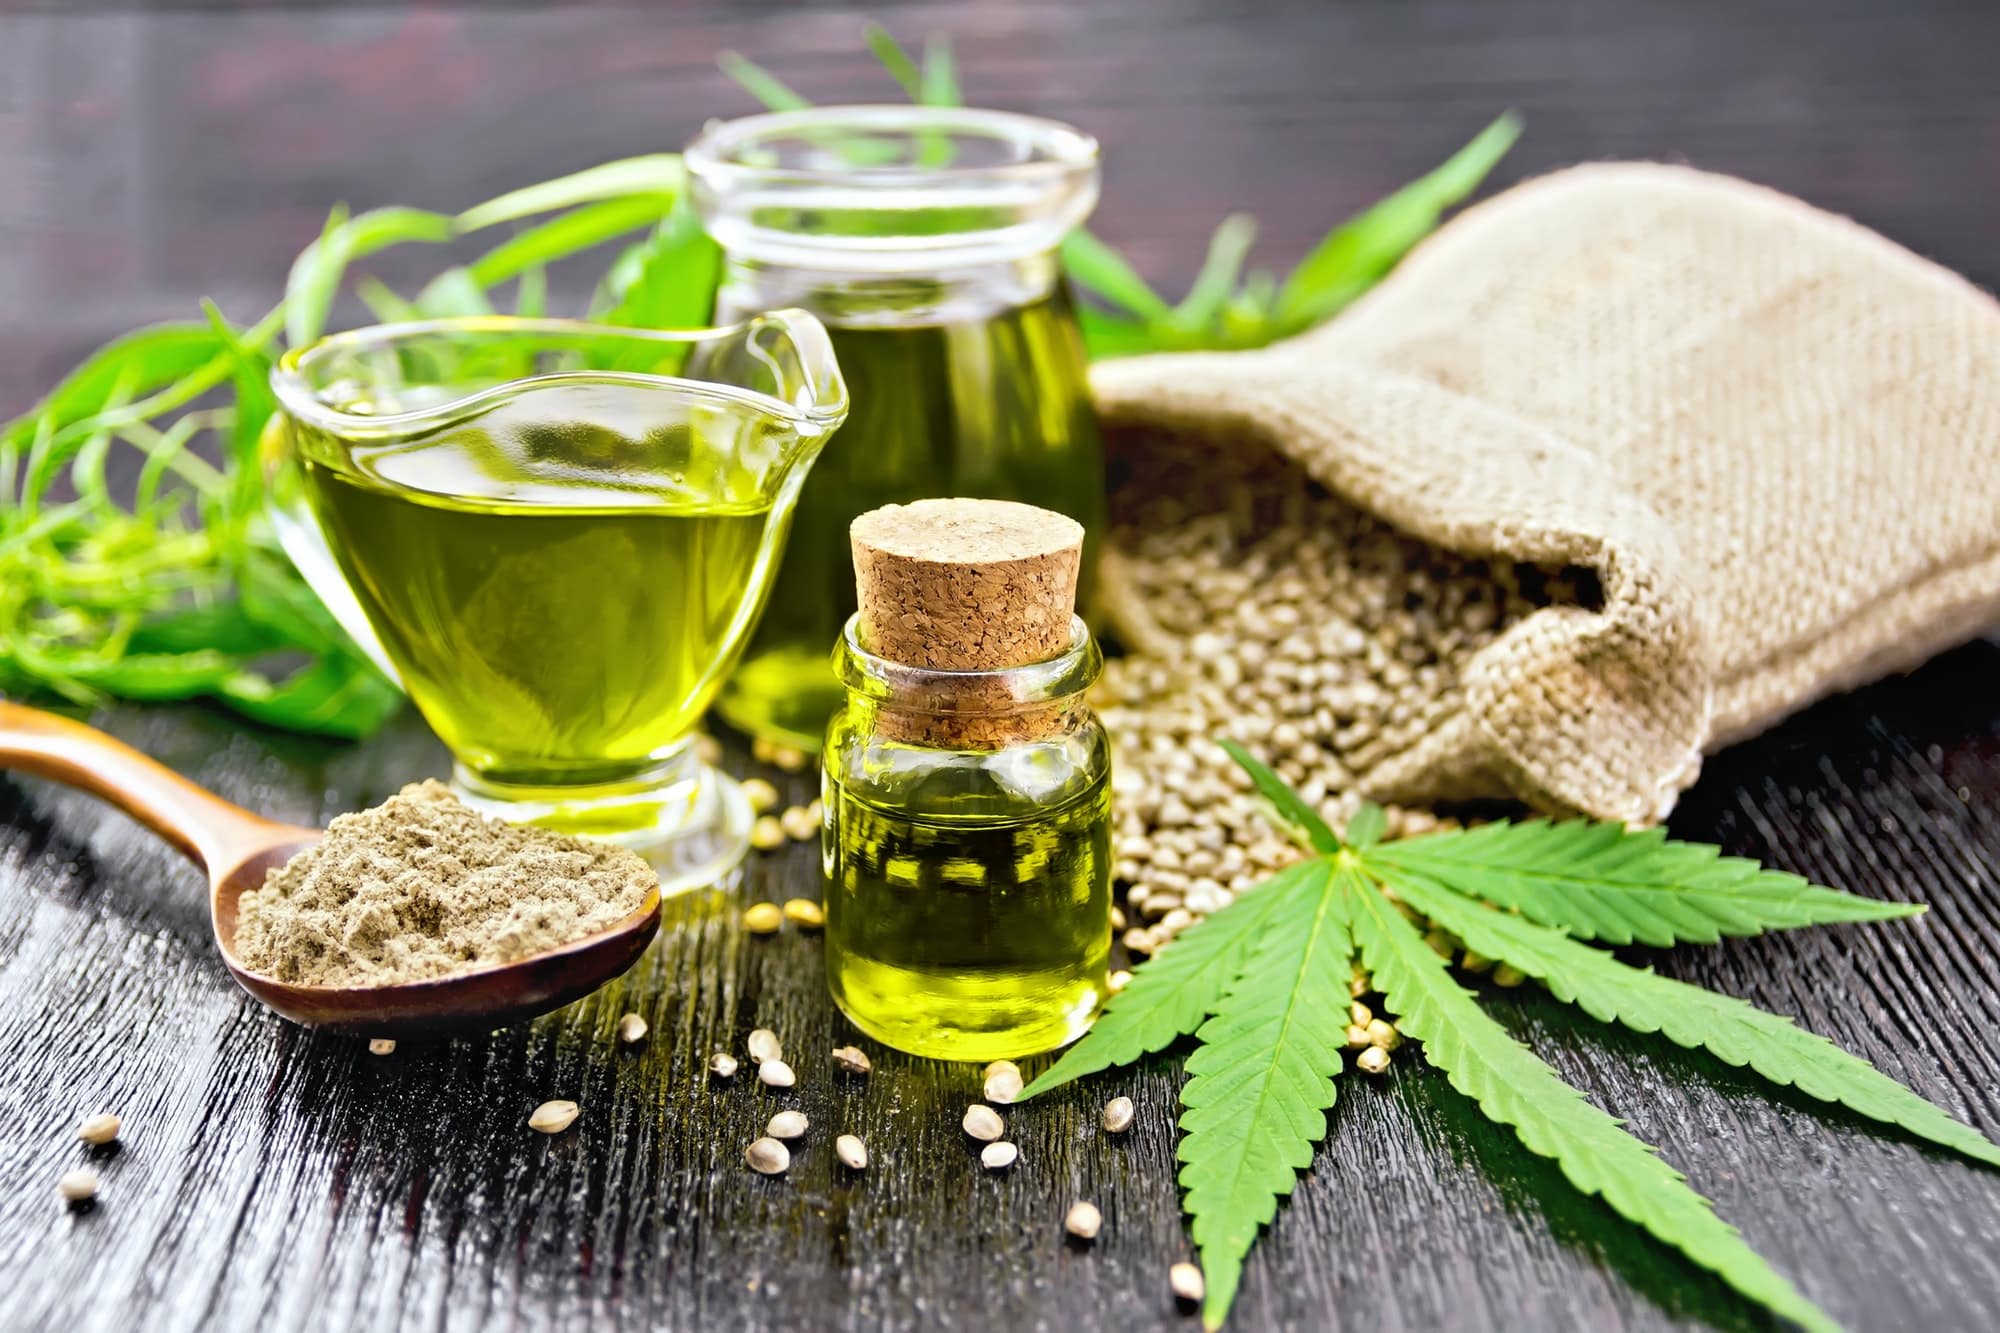 Tips for cooking and storing CBD oil